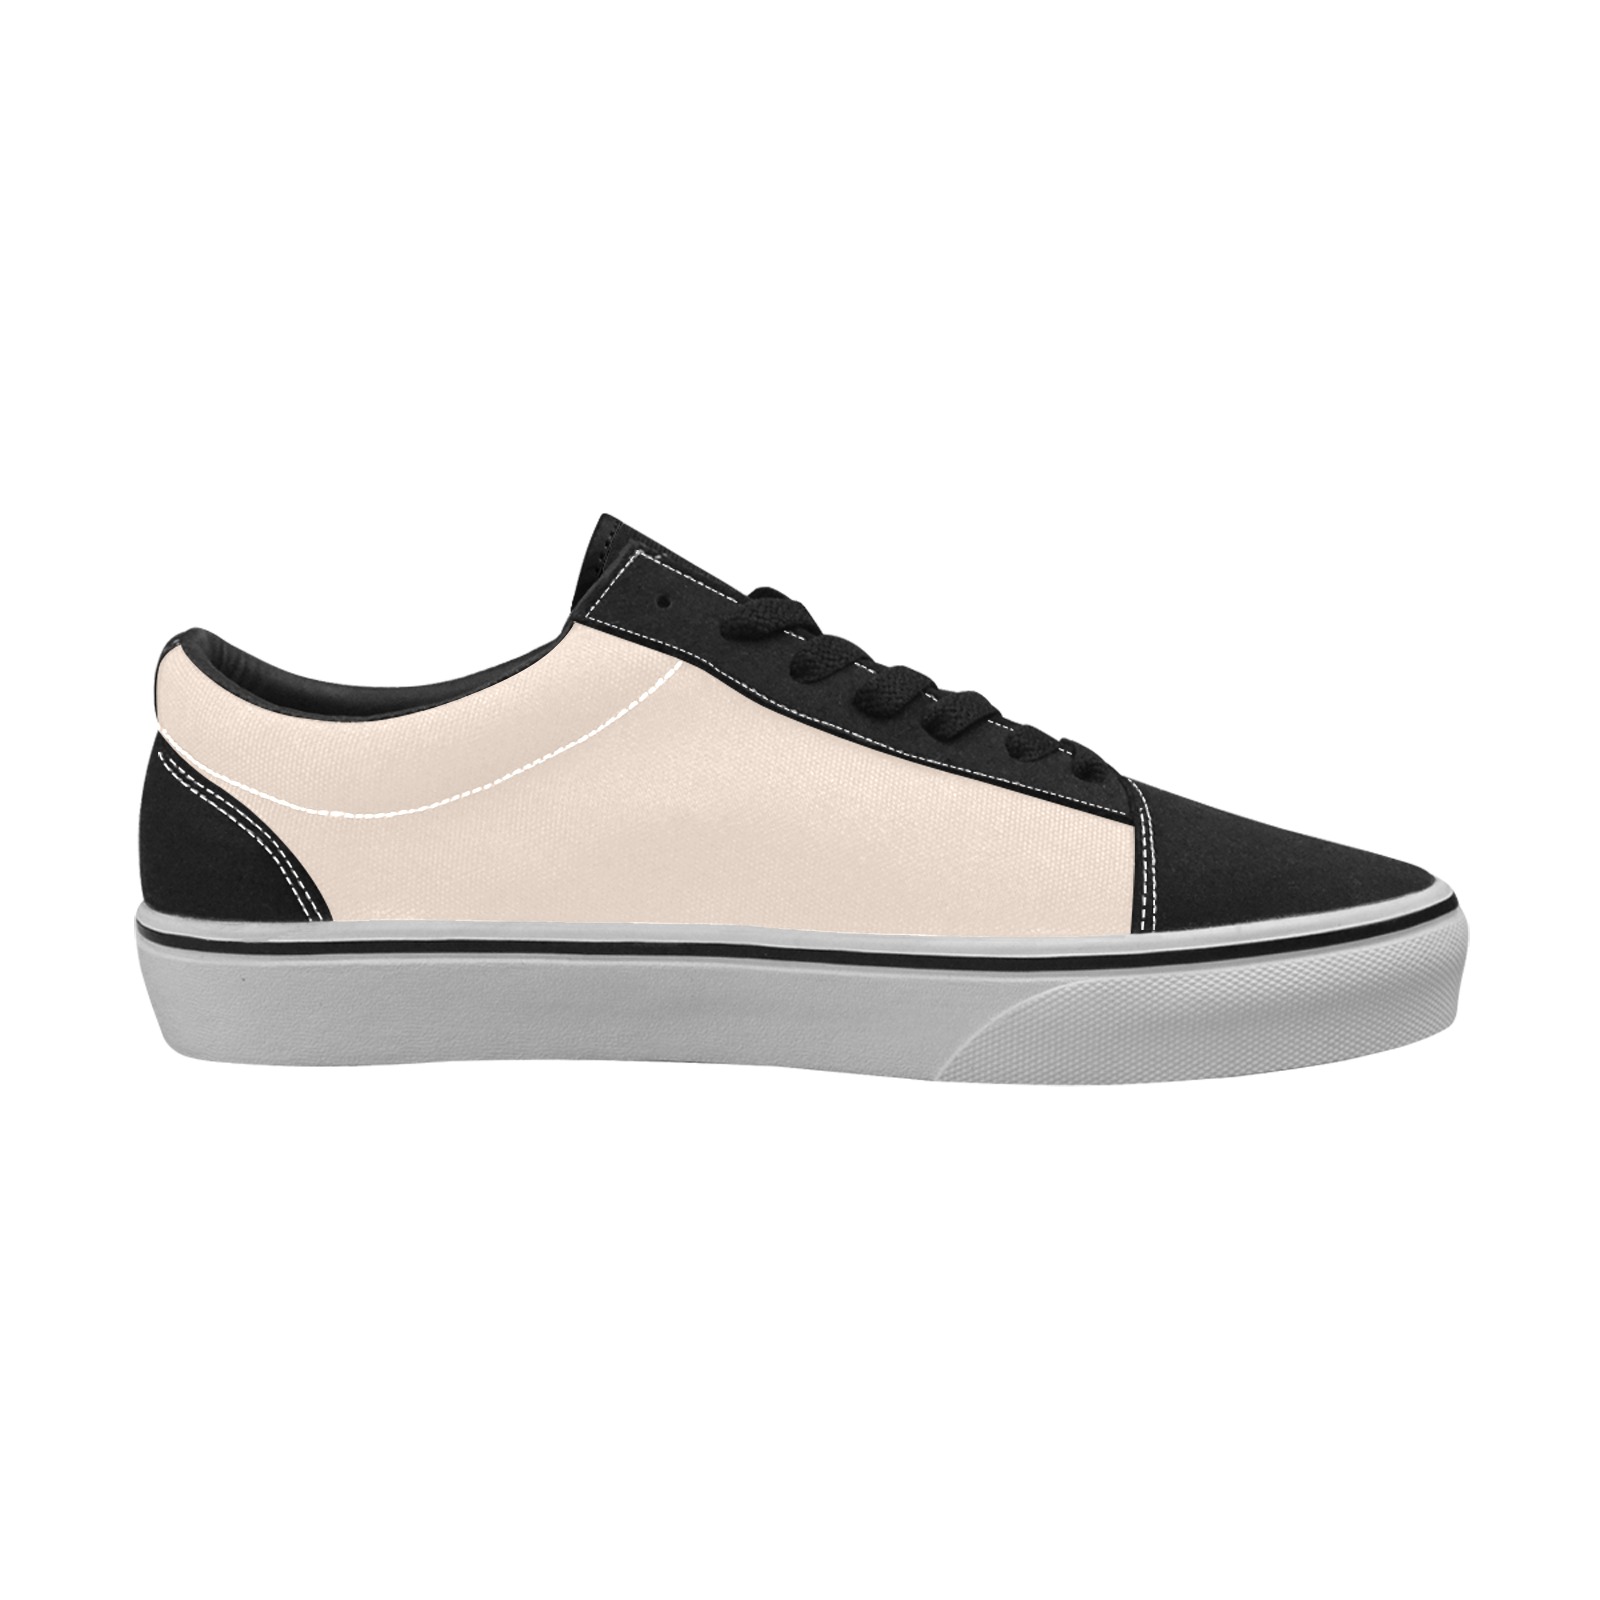 color champagne pink Women's Low Top Skateboarding Shoes (Model E001-2)